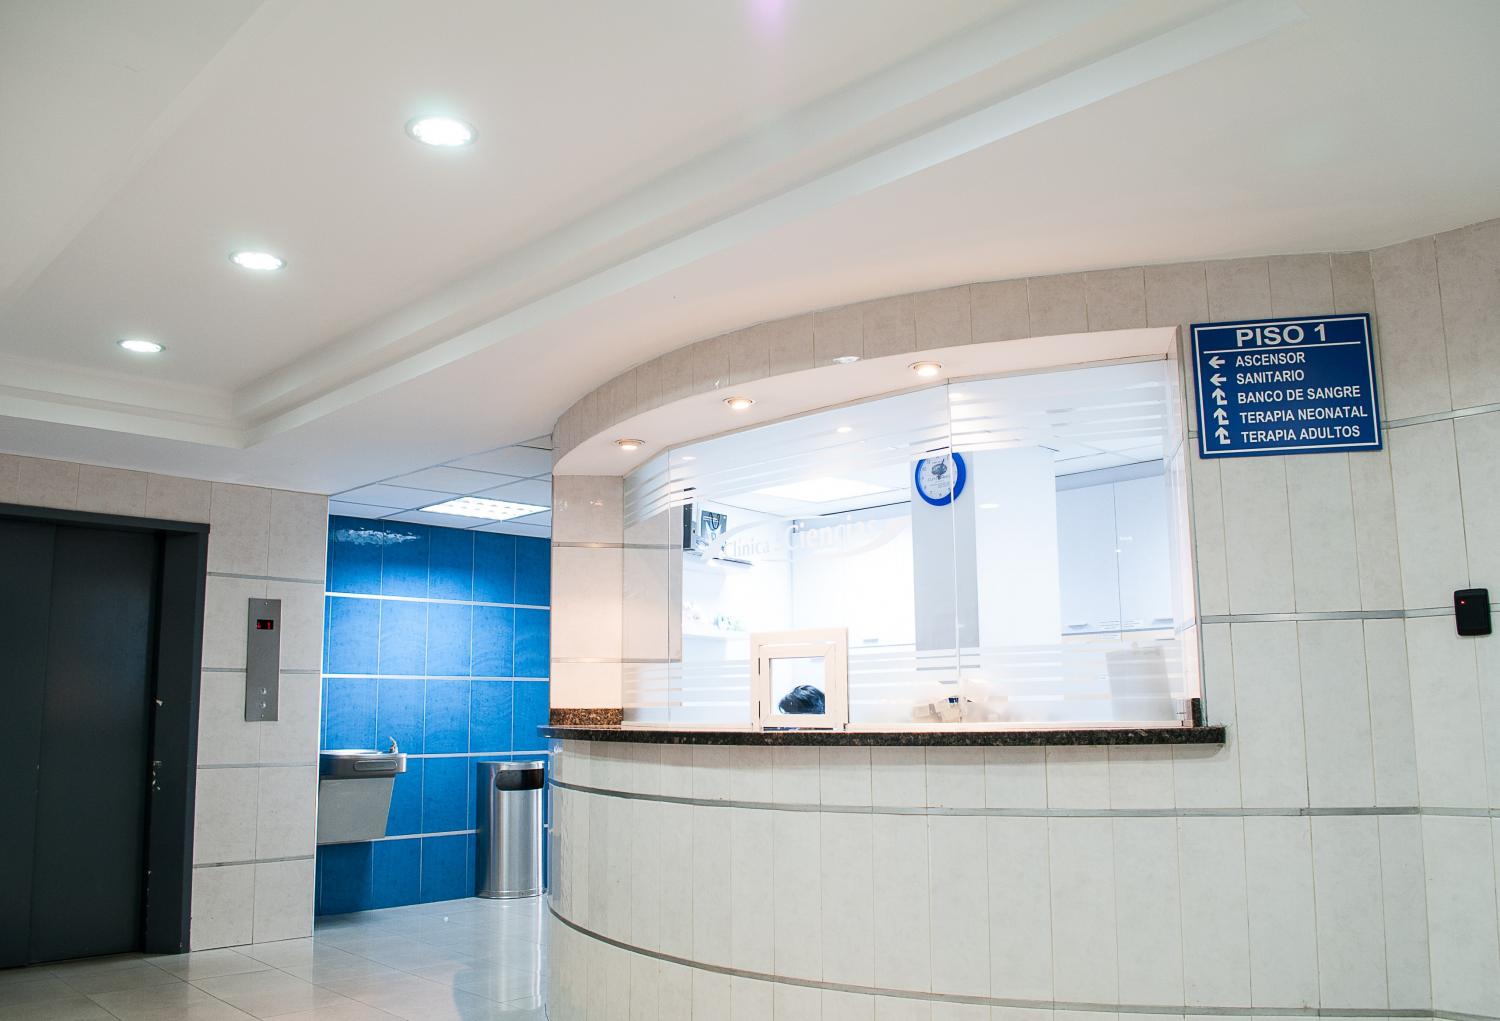 Image of interior hospital nurses' station. Photo Credit Photo by Martha Dominguez de Gouveia (Unsplash Free Images). Also link to Christelle Bucag's Spring 2021 HEP Symposium presentation of her article, "Exemplifying the Panopticon: A case study on hospital architecture." 